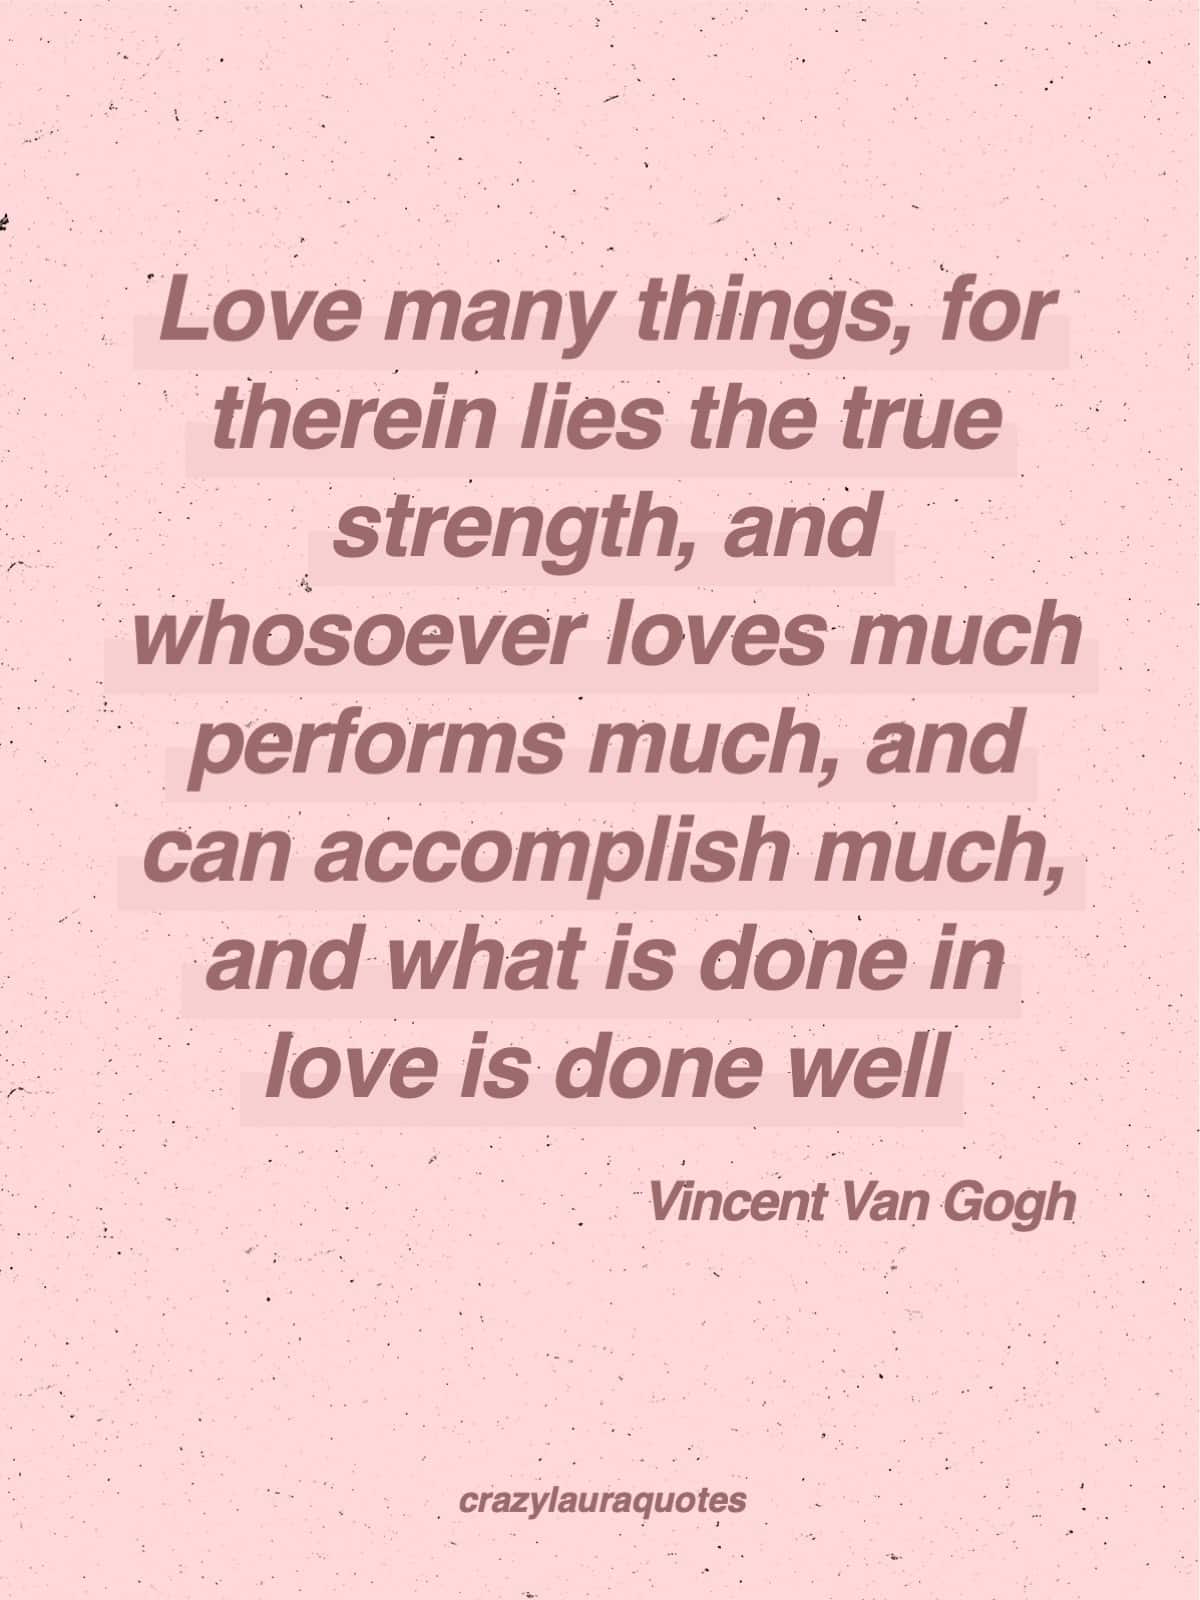 what is done in love is done well quote